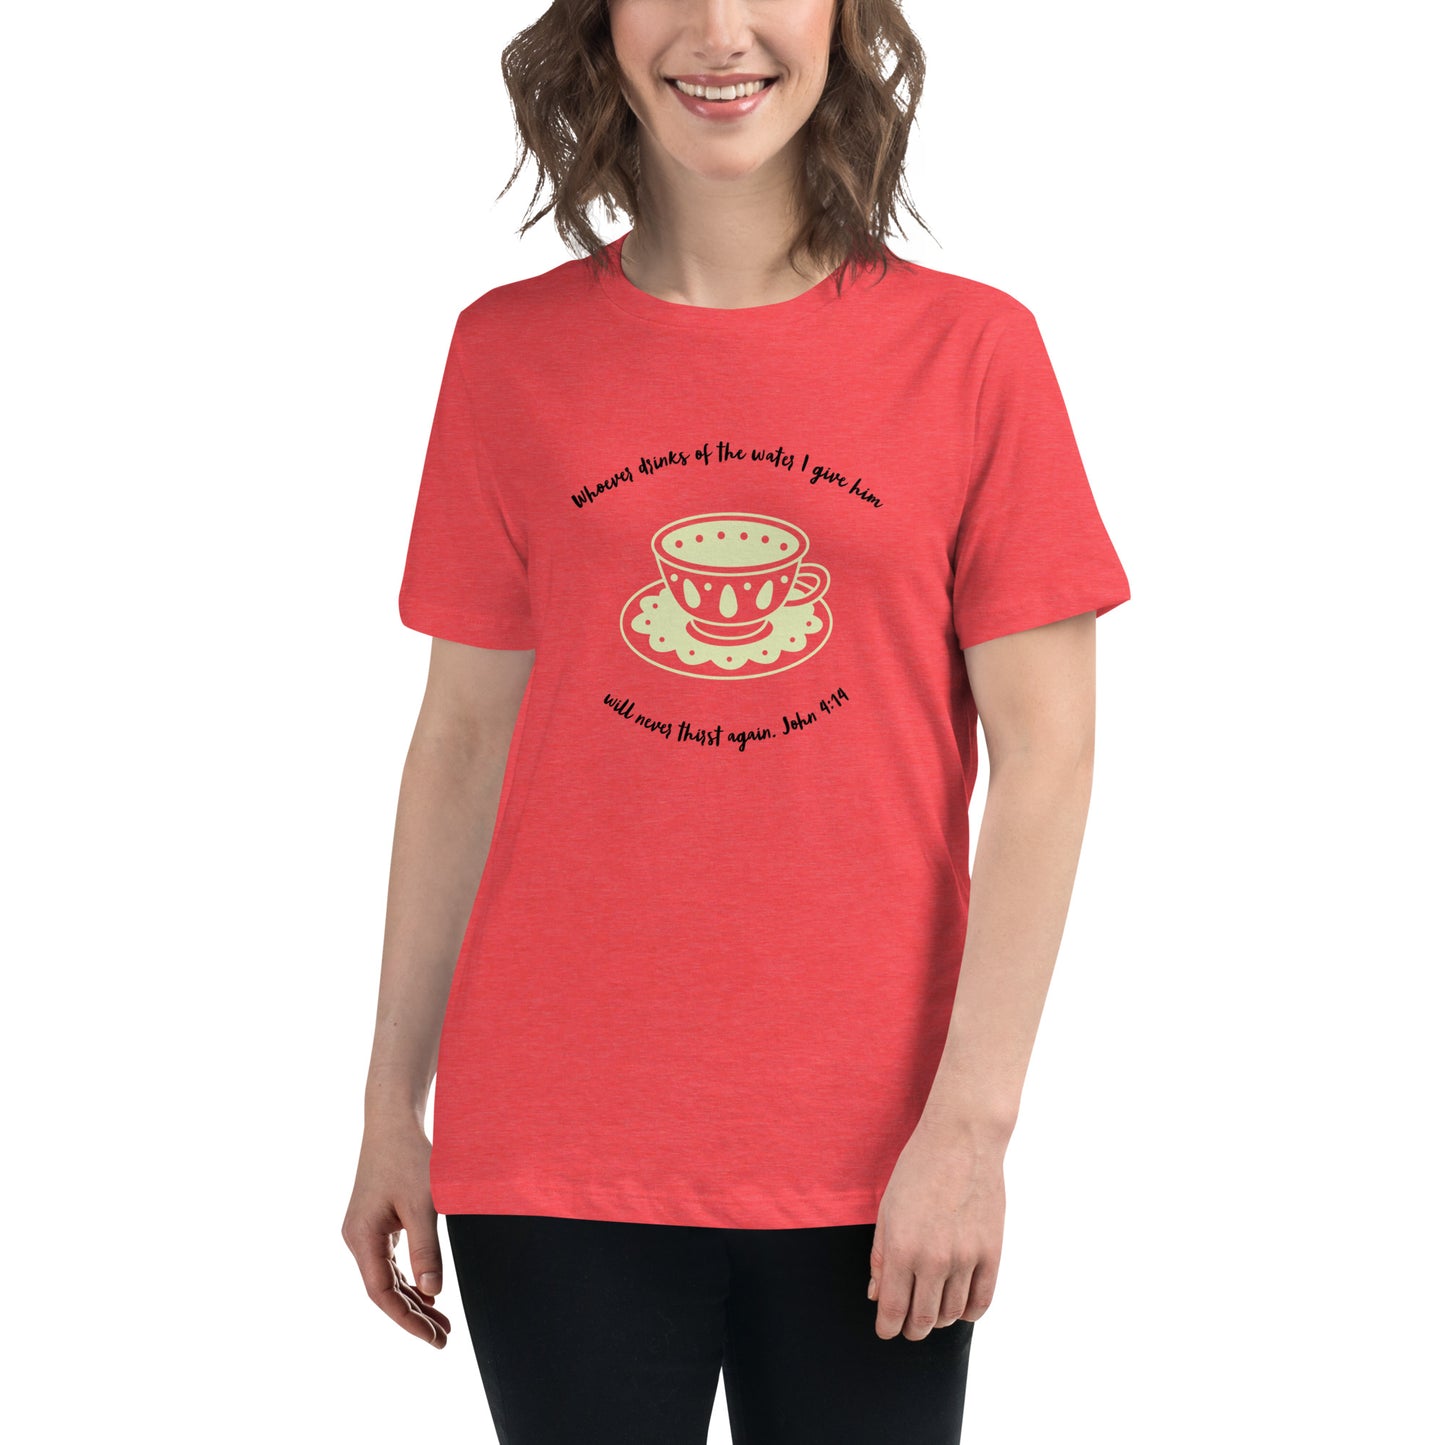 Never thirst again women's relaxed t-shirt | Christian t shirts